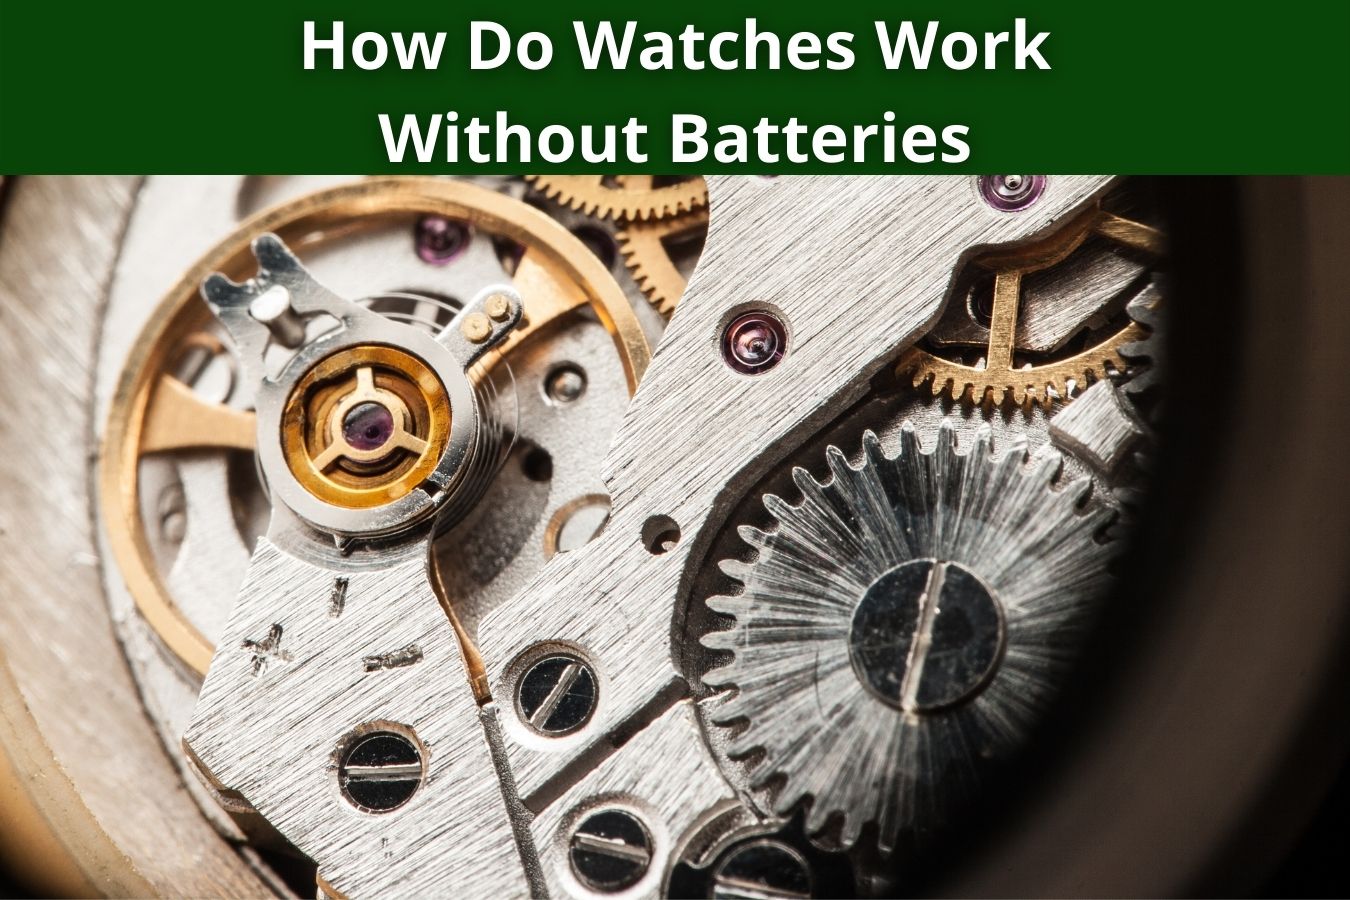 How Do Watches Work Without Batteries - Watch As They Go